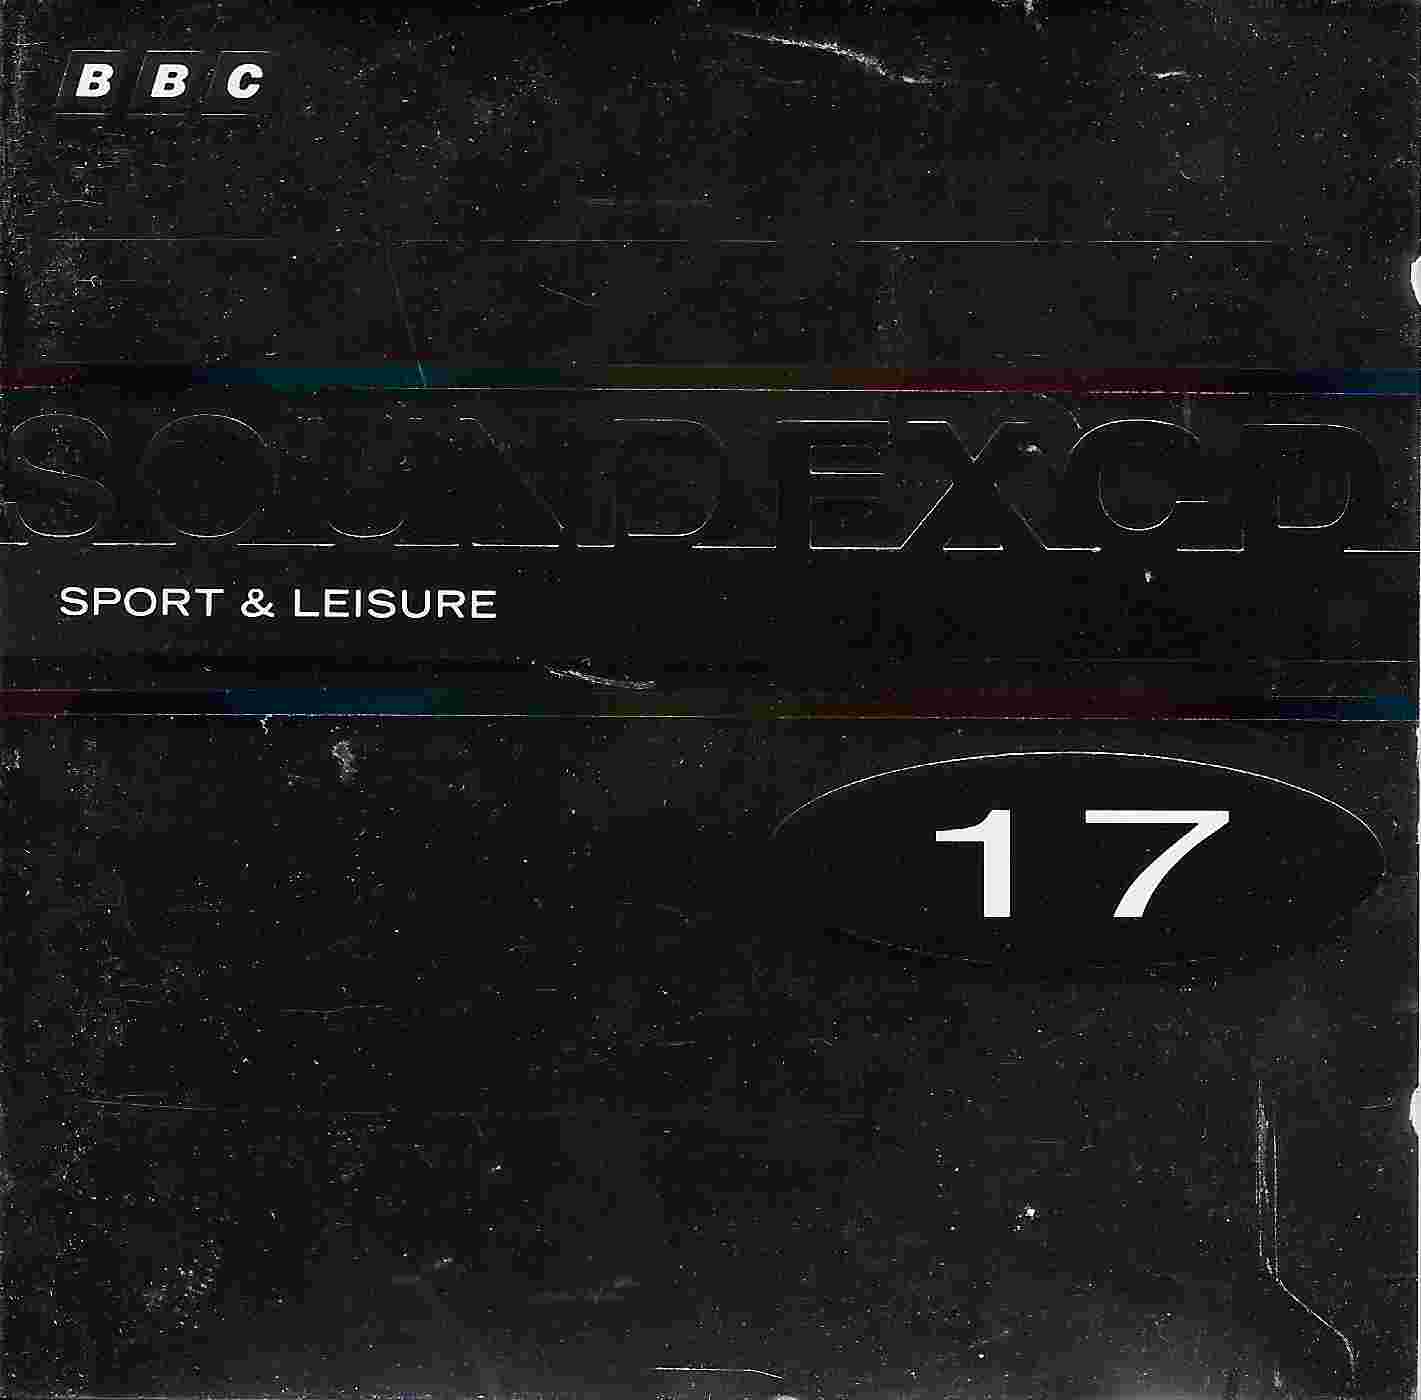 Picture of BBCCD SFX017 Sport and leisure by artist Various from the BBC records and Tapes library